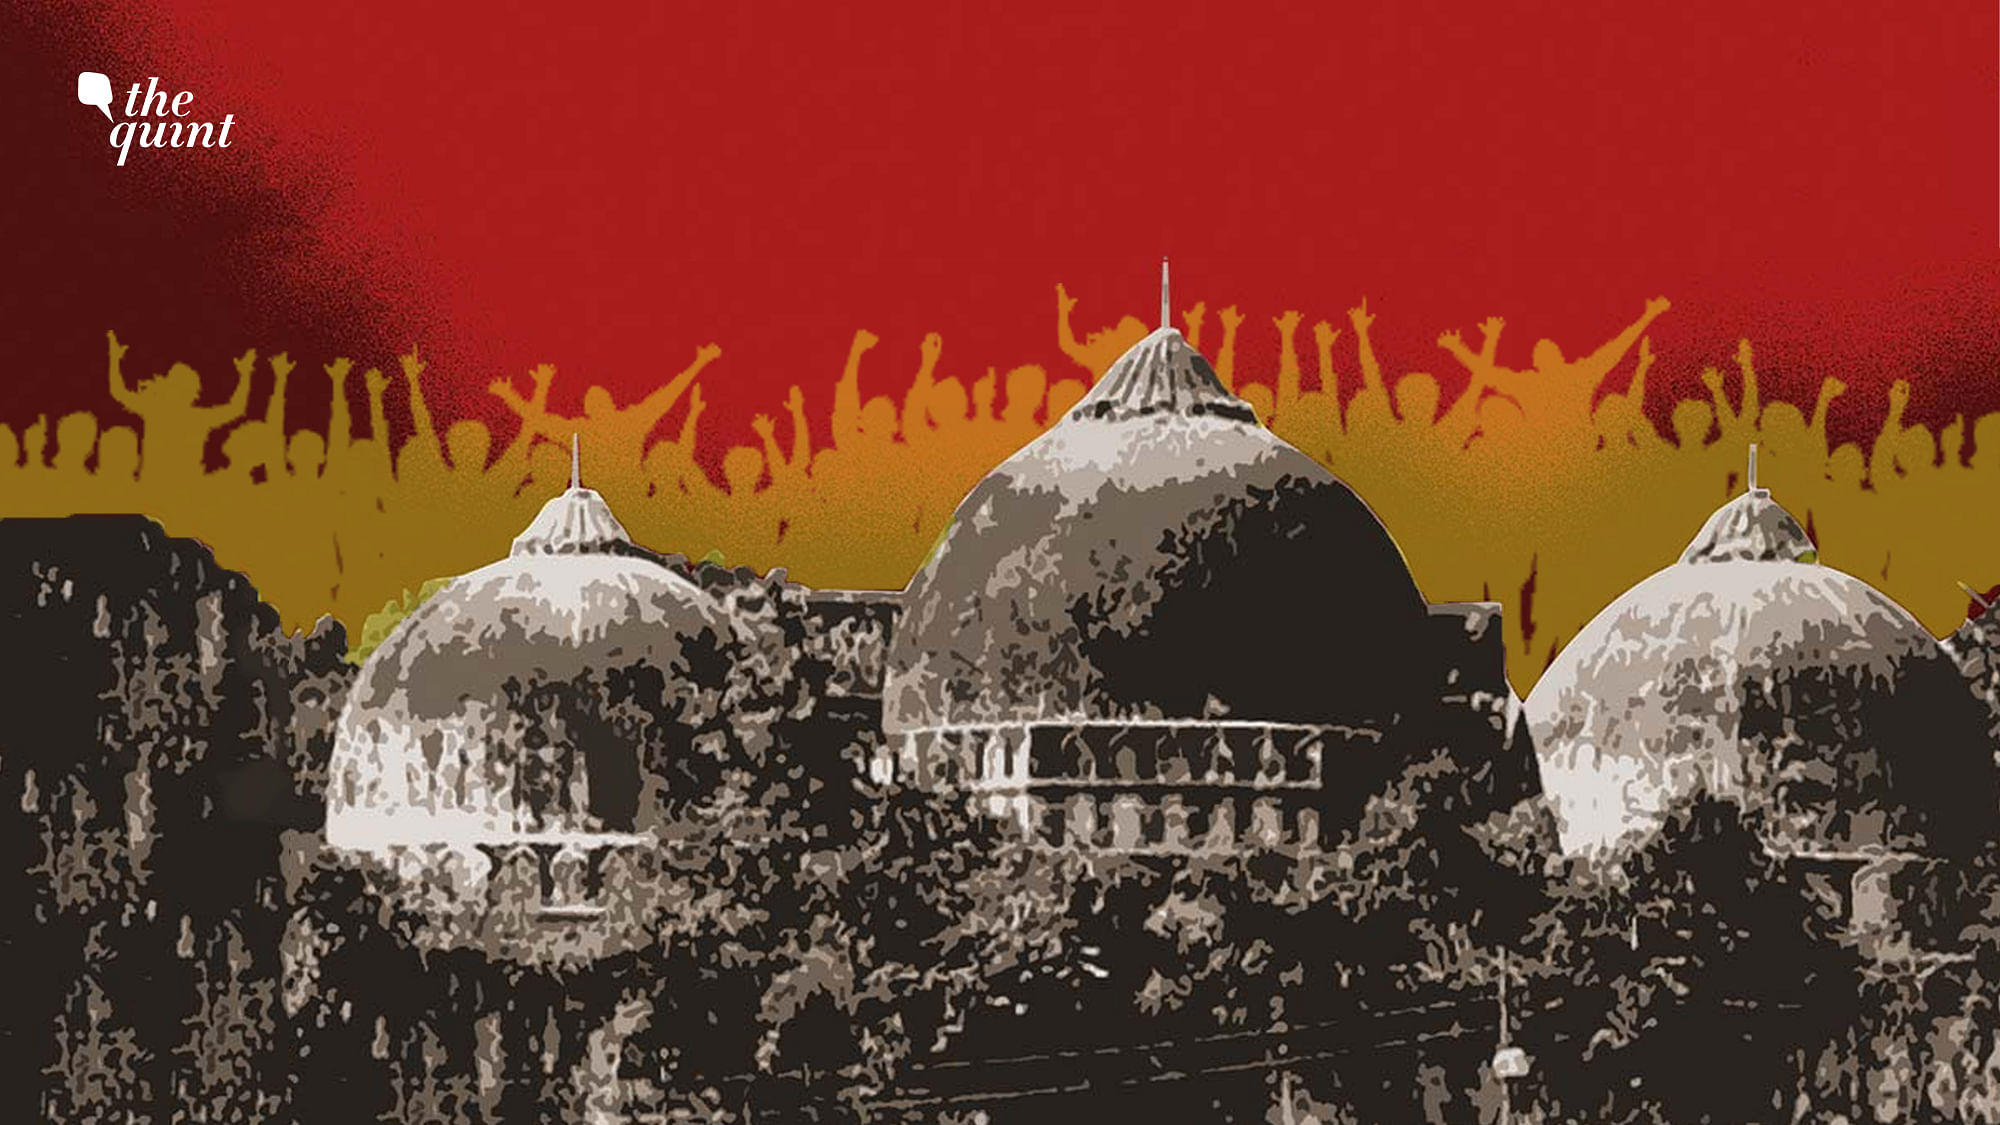 Babri Masjid Demolition Conspiracy Case: All 32 accused including LK Advani have been acquitted.&nbsp;